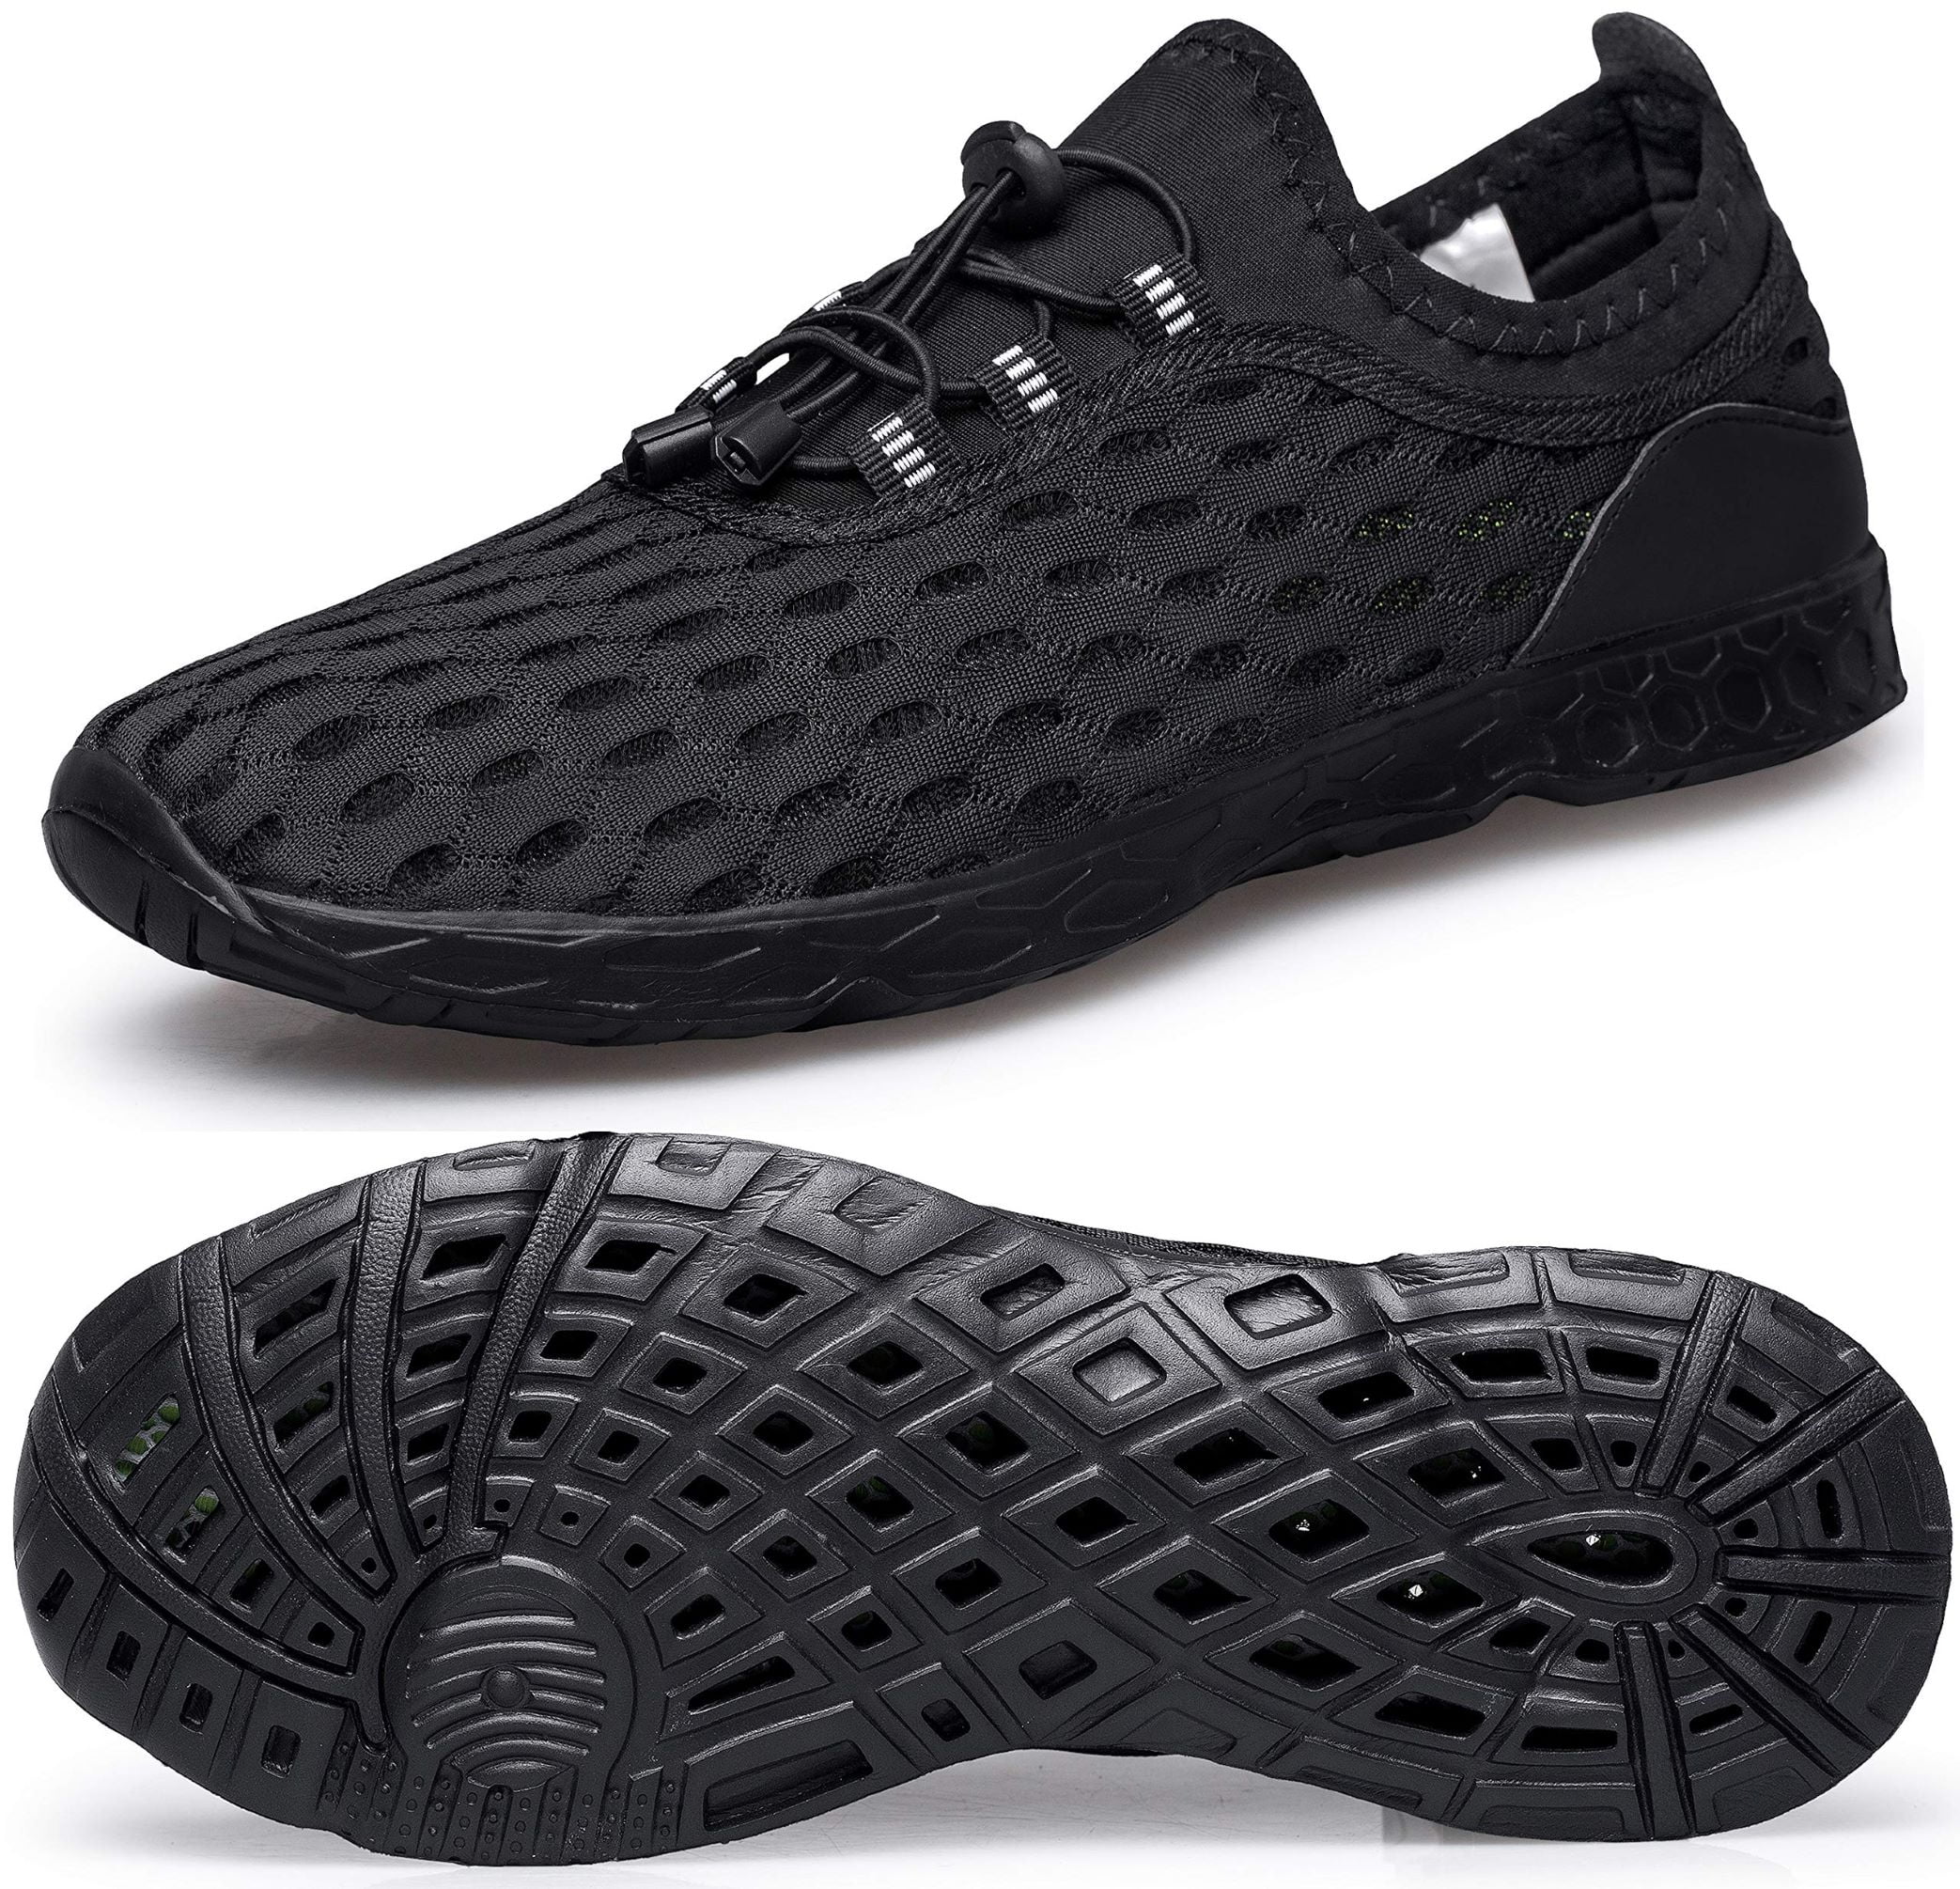 Barerun Womens Water Shoes Barefoot Outdoor Athletic Sports Shoes ...